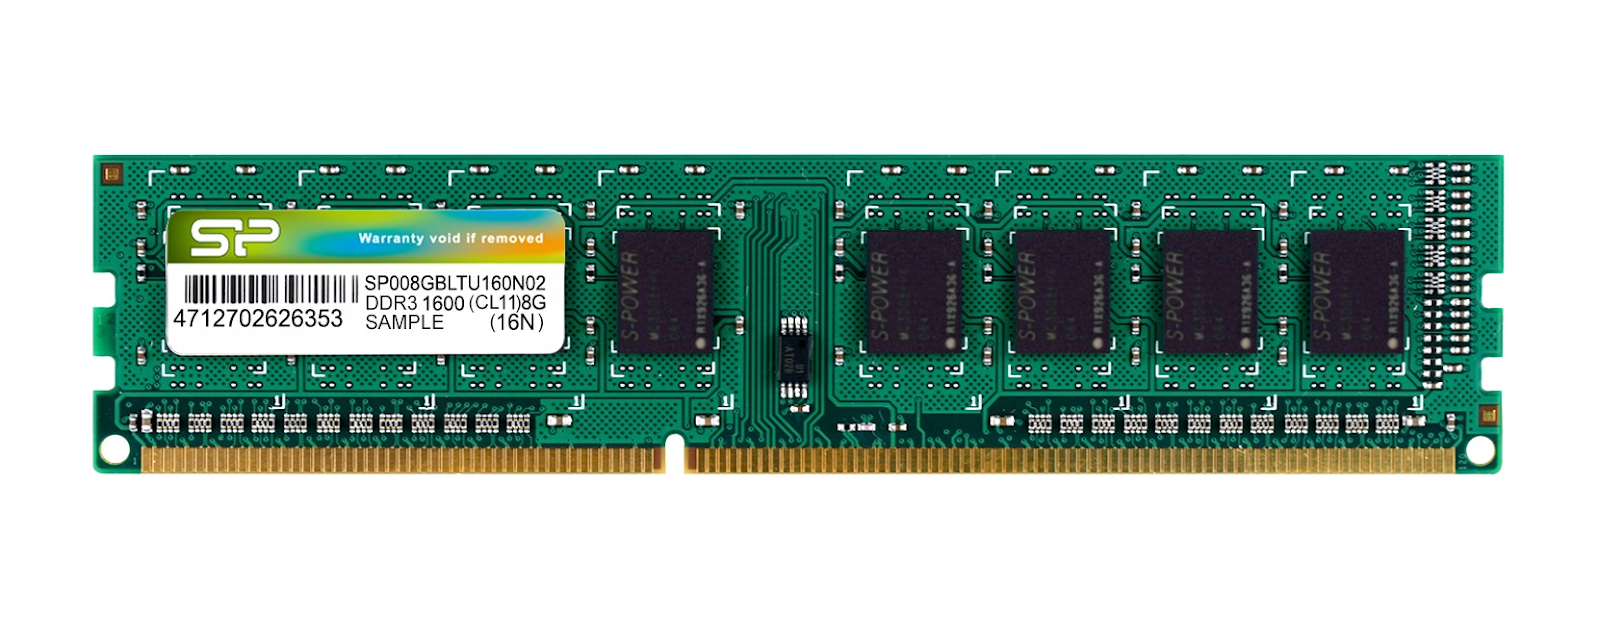 Ddr2 Vs Ddr3 What’s The Difference 2022 Review